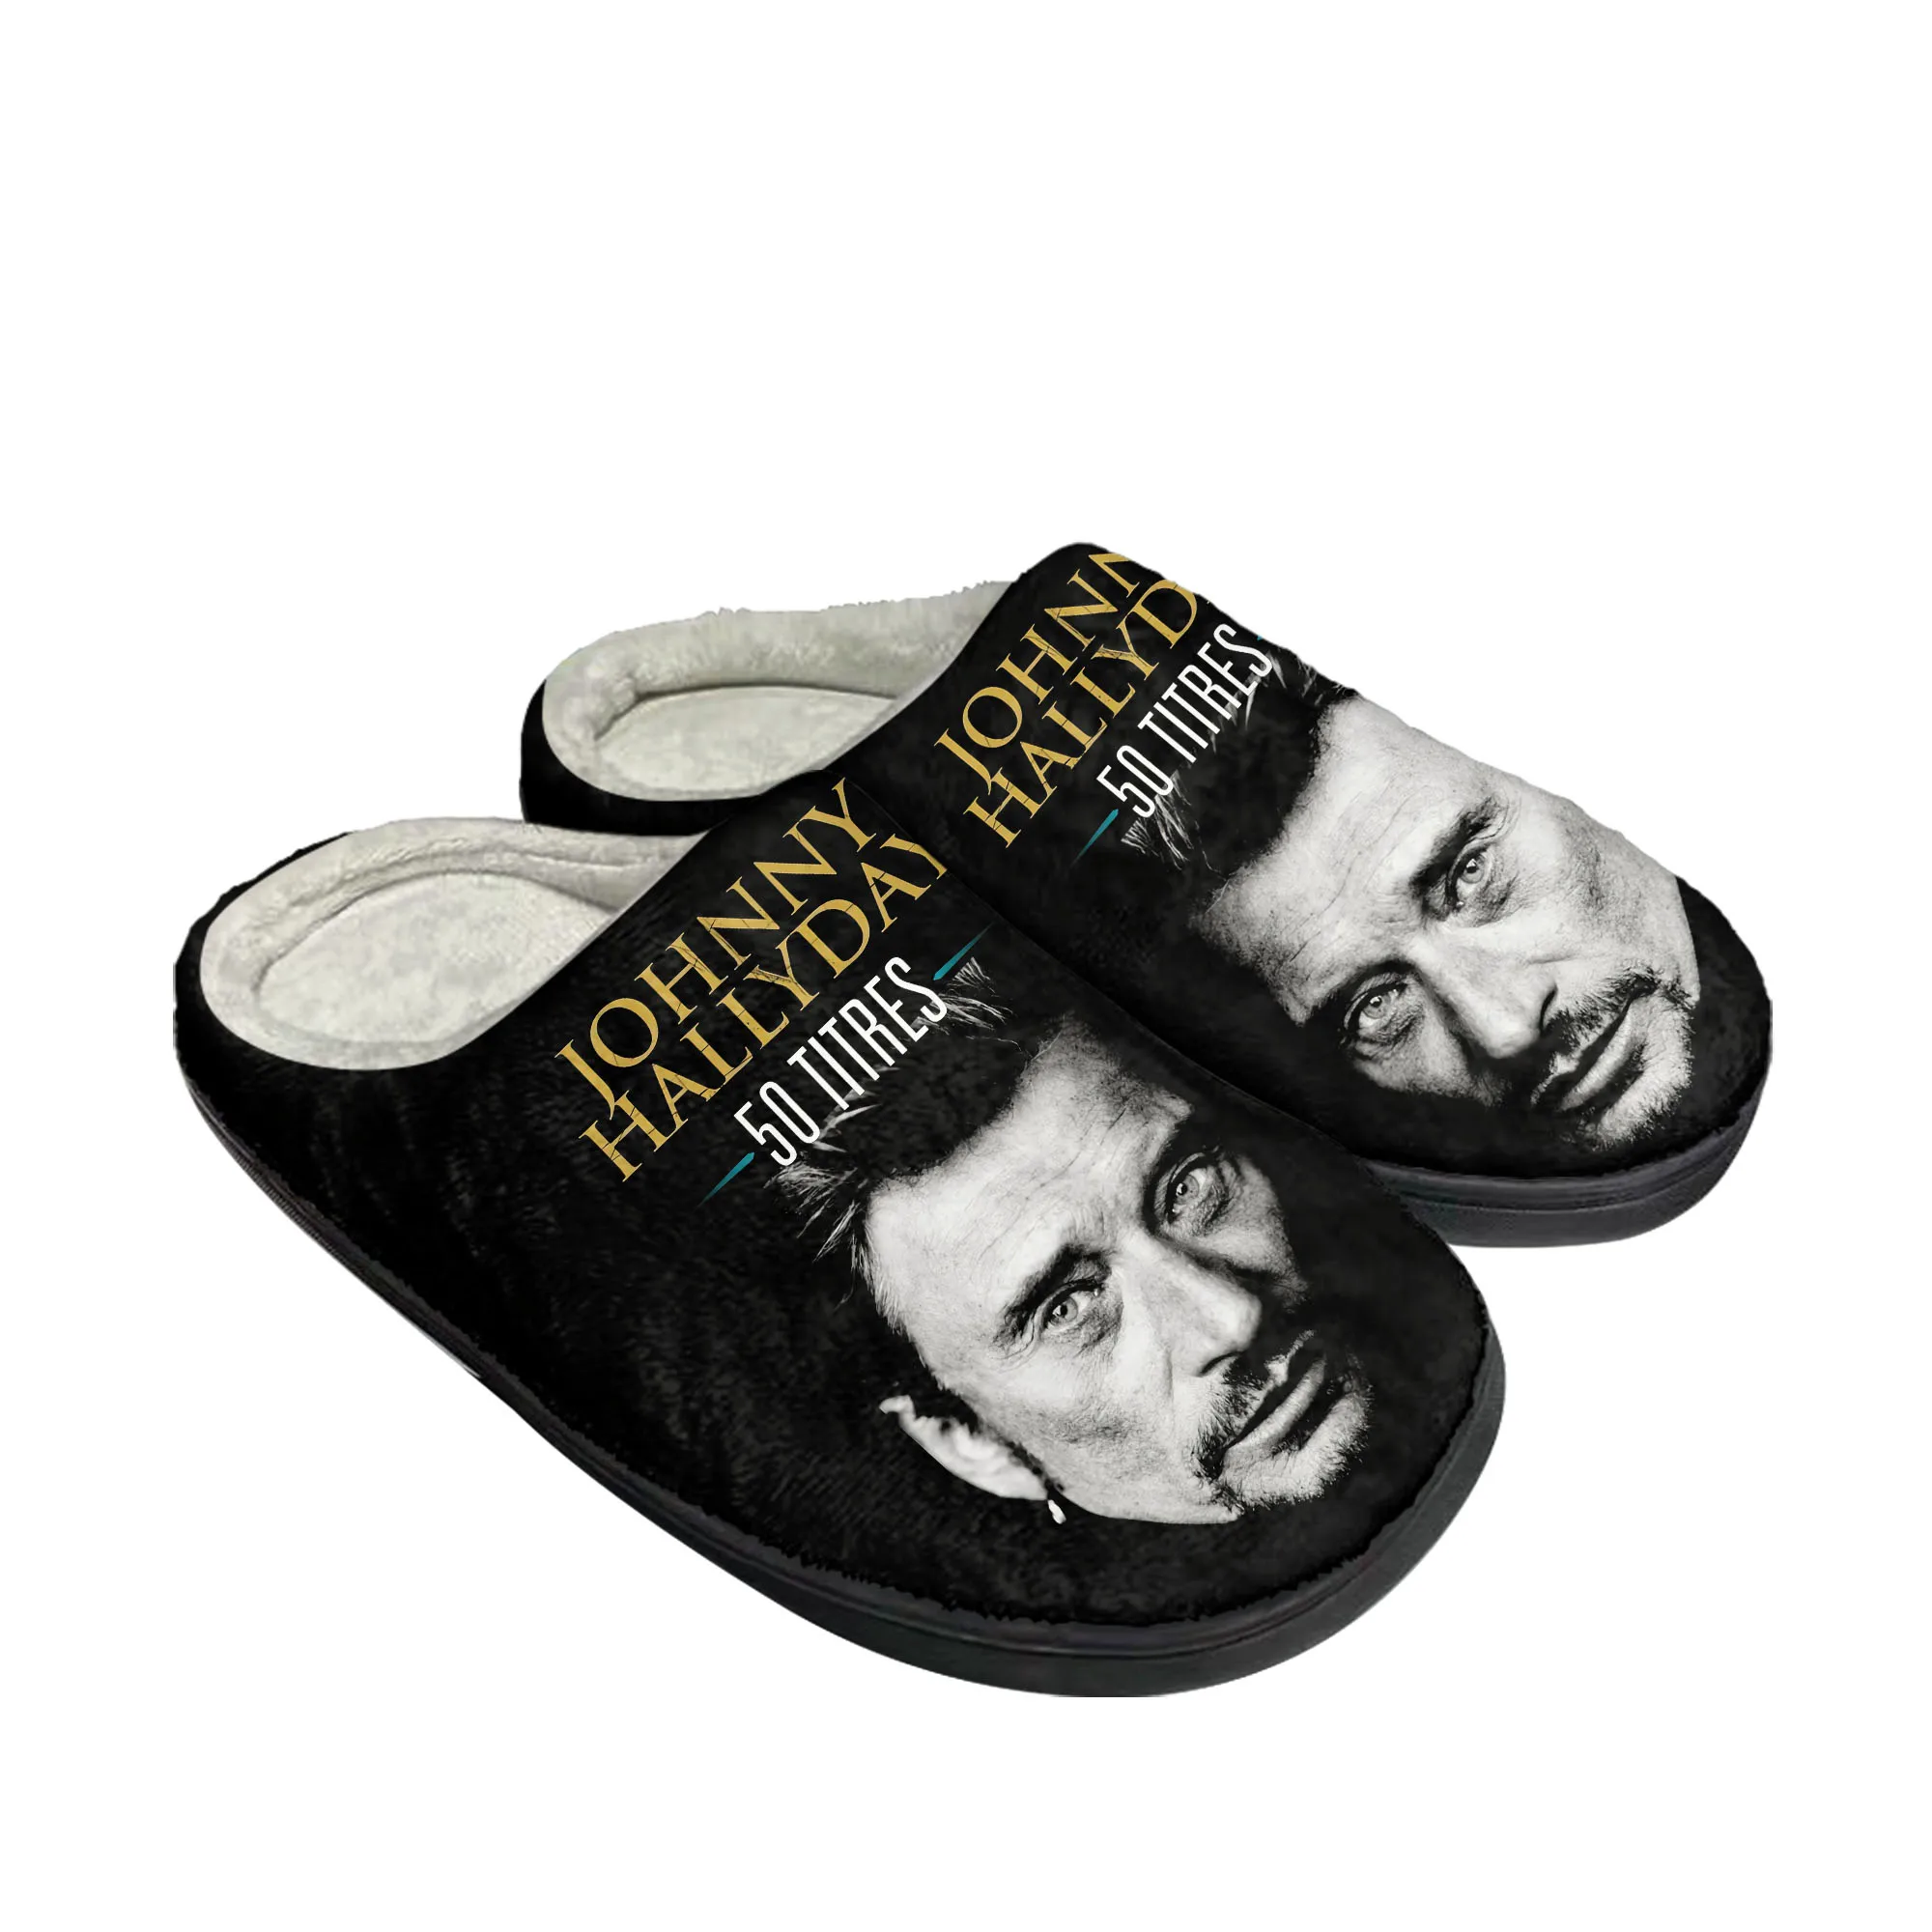 

Johnny Hallyday Rock Singer Home Cotton Custom Slippers Mens Women Sandals Plush Casual Keep Warm Shoes Non-Slip Thermal Slipper